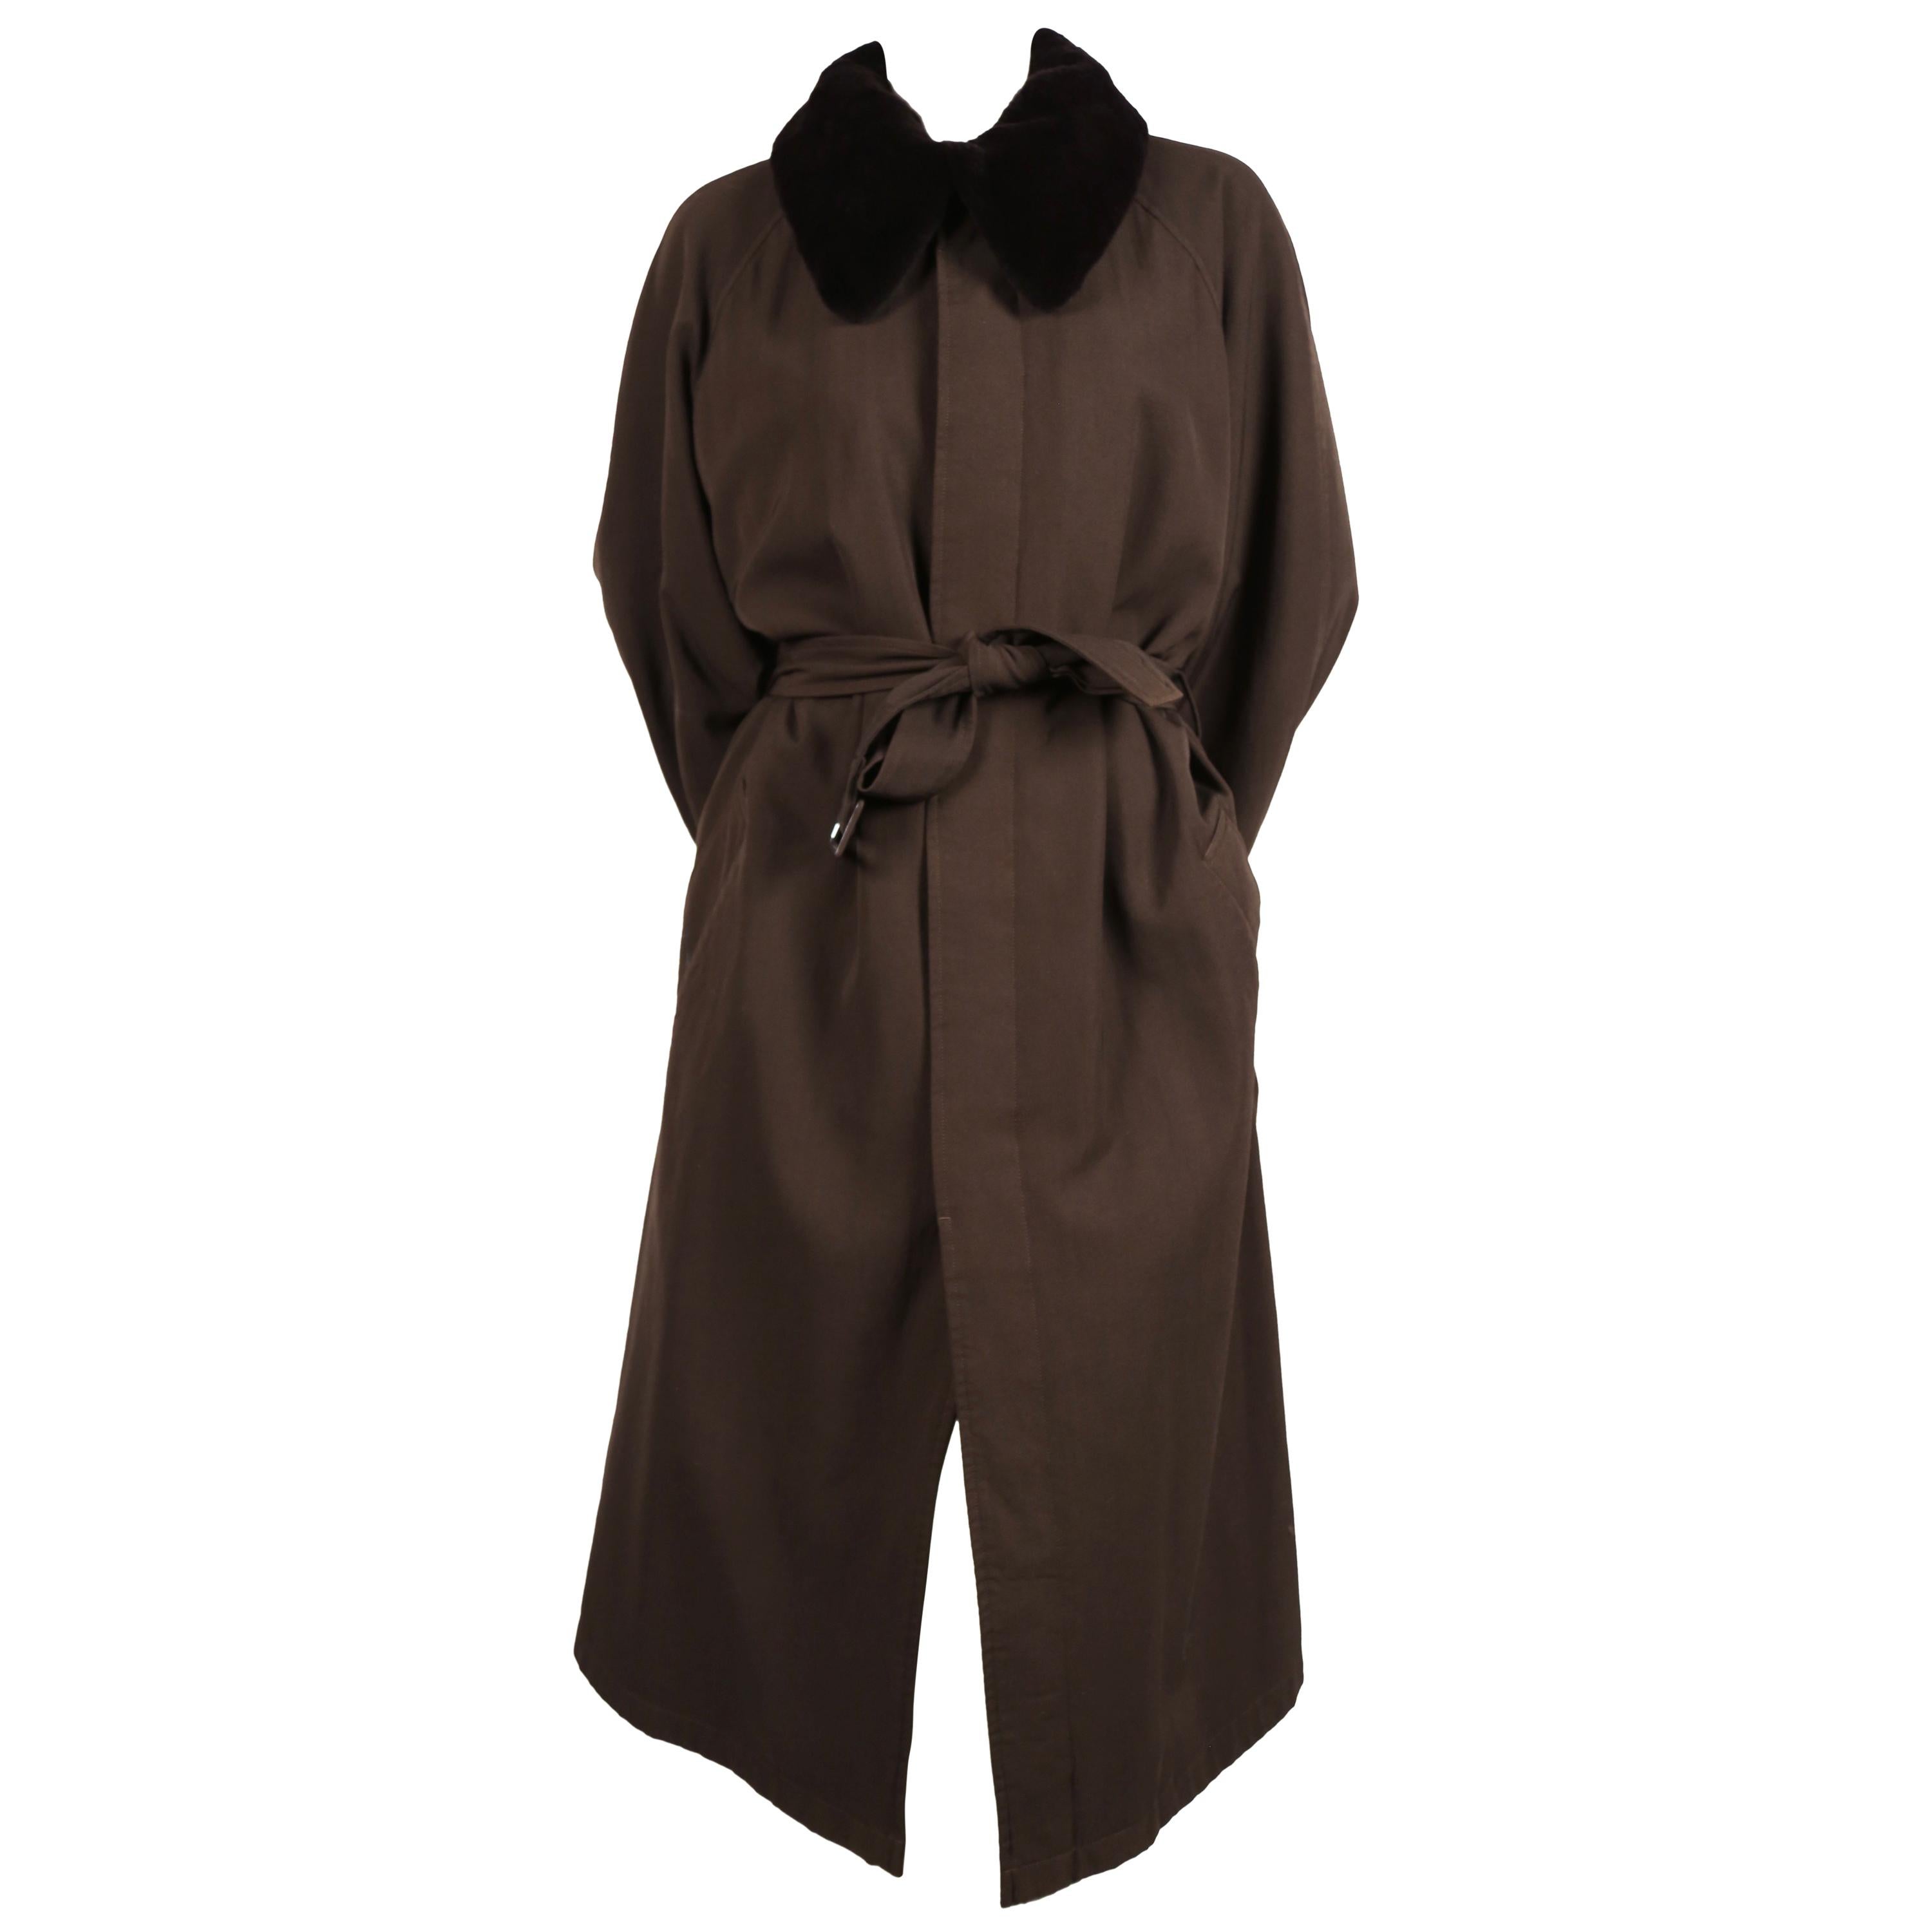 1990 Yohji Yamamoto pour homme wool trench coat with removable mink collar 